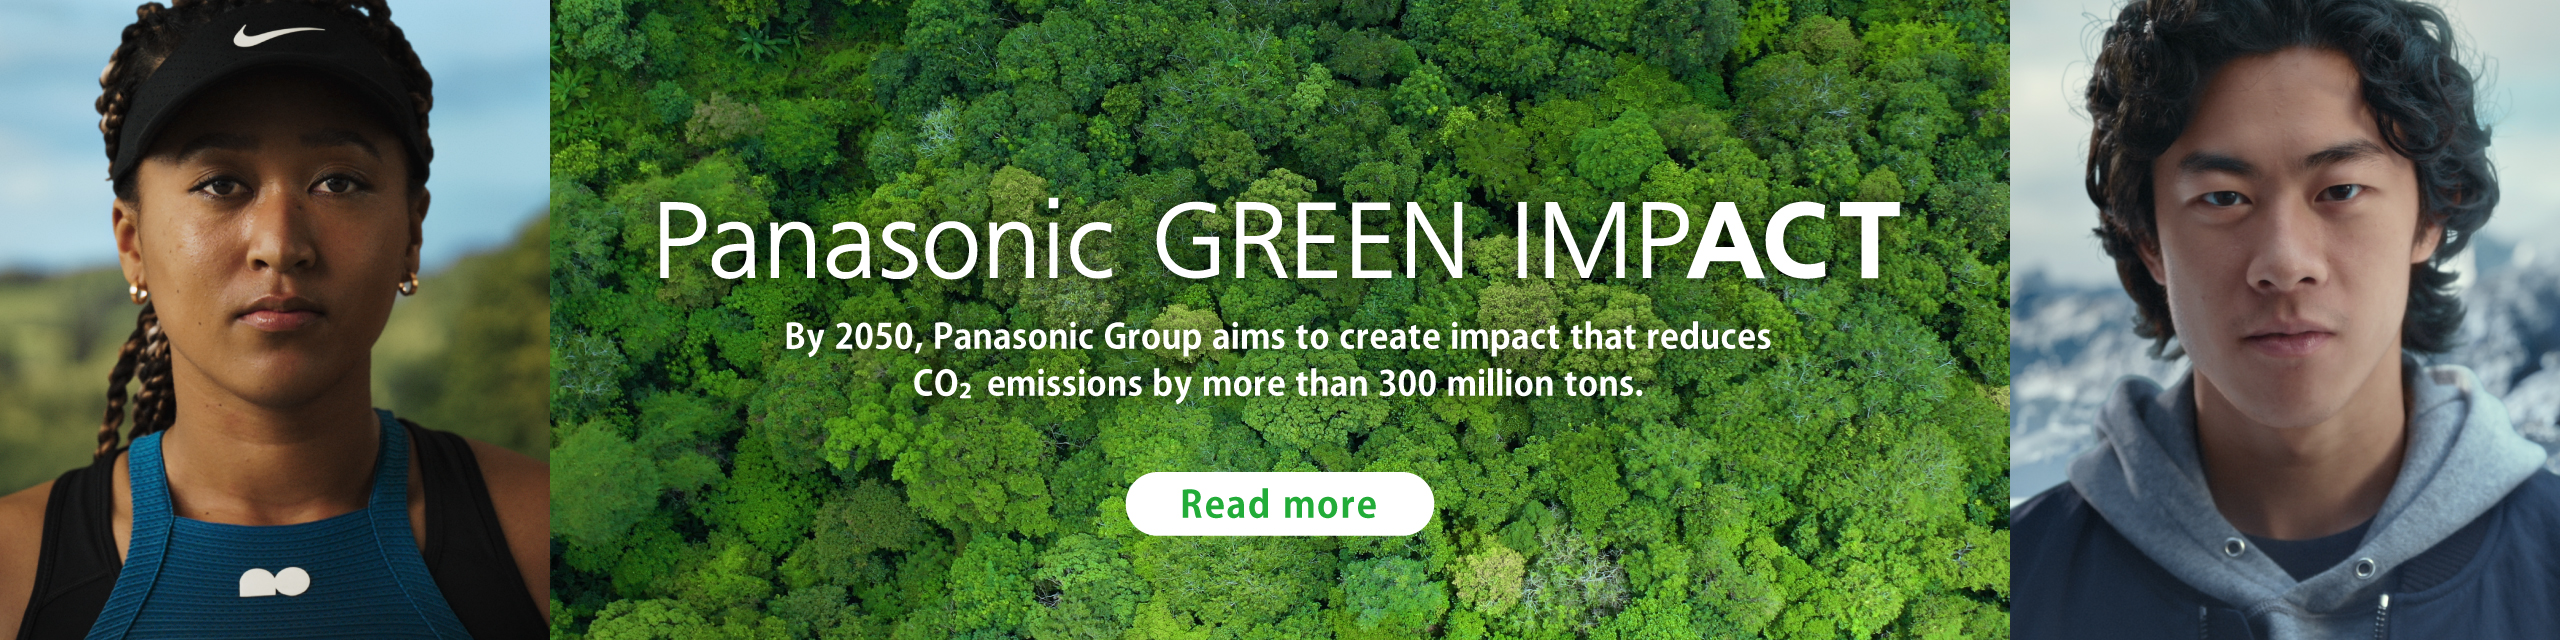 Panasonic GREEN IMPACT By 2050, Panasonic Group aims to create impact that reduces CO2 emissions by more than 300 million tons.